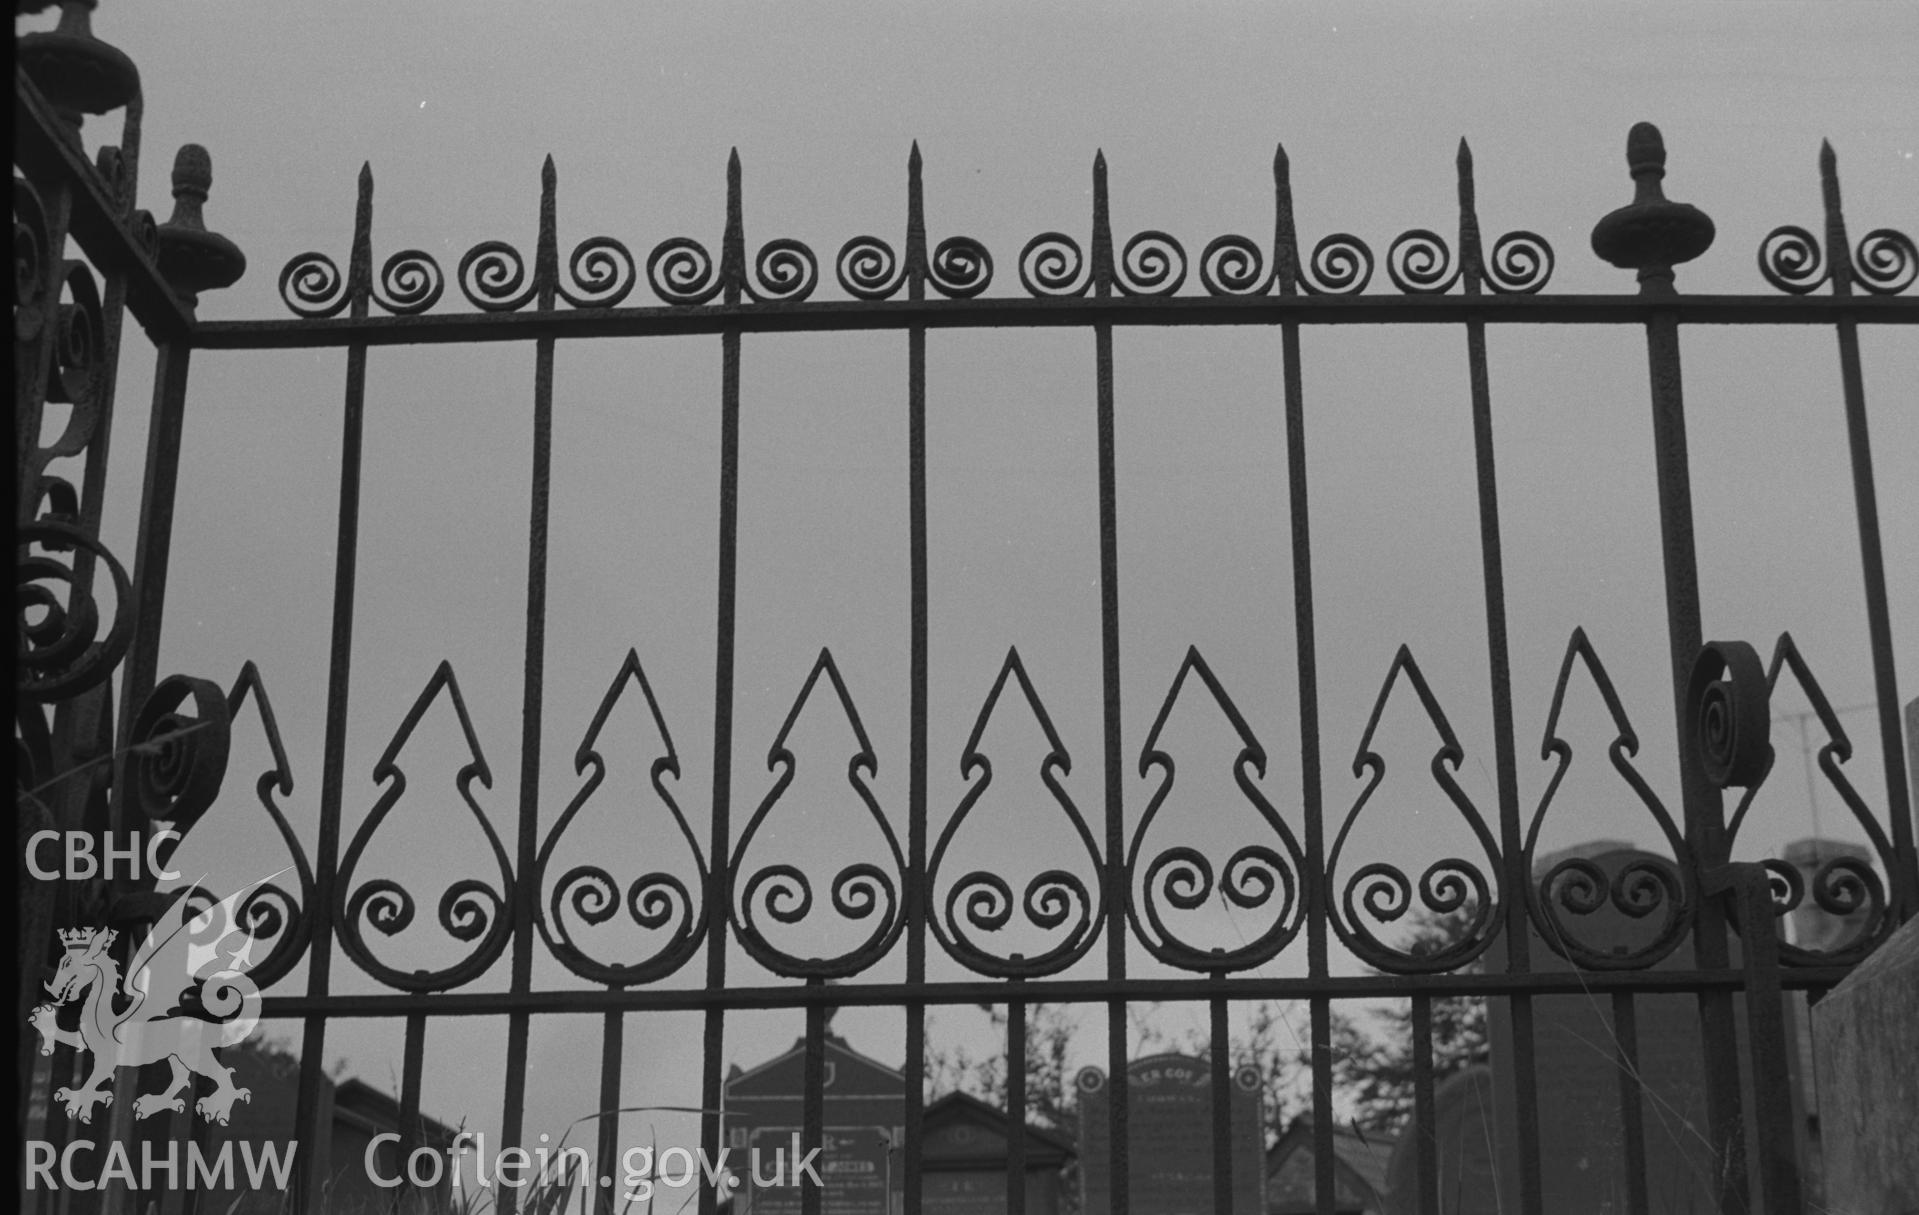 Digital copy of a black and white negative showing view of wrought iron gates at Capel Pant-y-Defaid Welsh Unitarian chapel, Pren-Gwyn, Llandysul. Photographed by Arthur O. Chater on 7th September 1966.